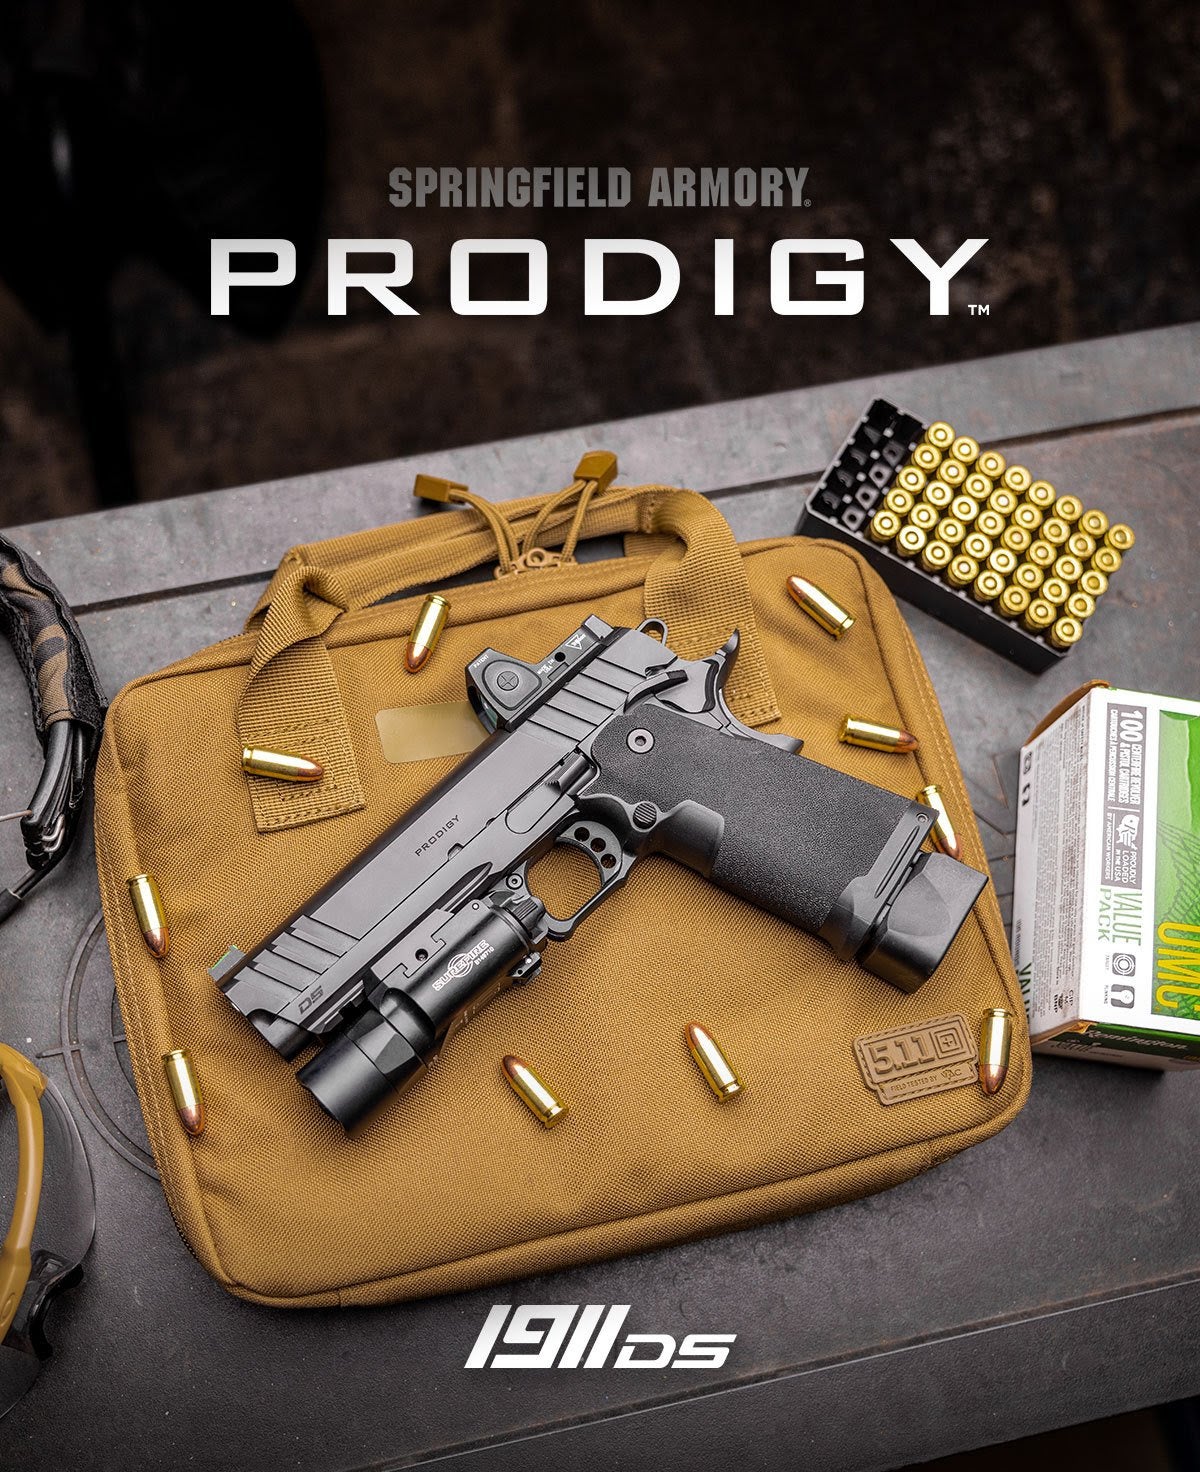 NEW Springfield Armory 1911 DS Prodigy AOS: Double-Stack 2011